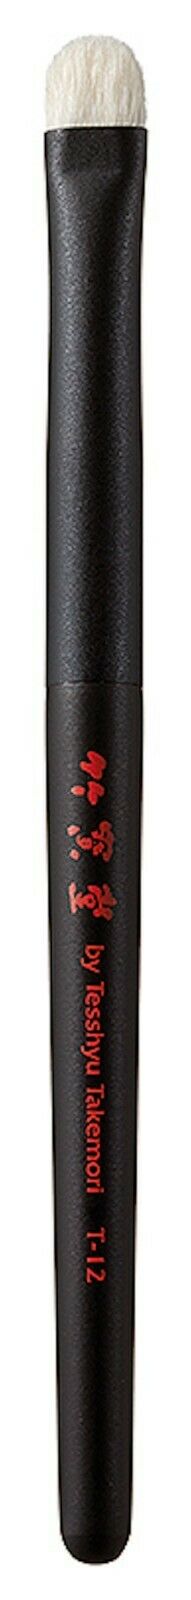 Chikuhodo T-12 Eye Shadow Makeup Brush Highest Quality Goat from Kyoto Japan